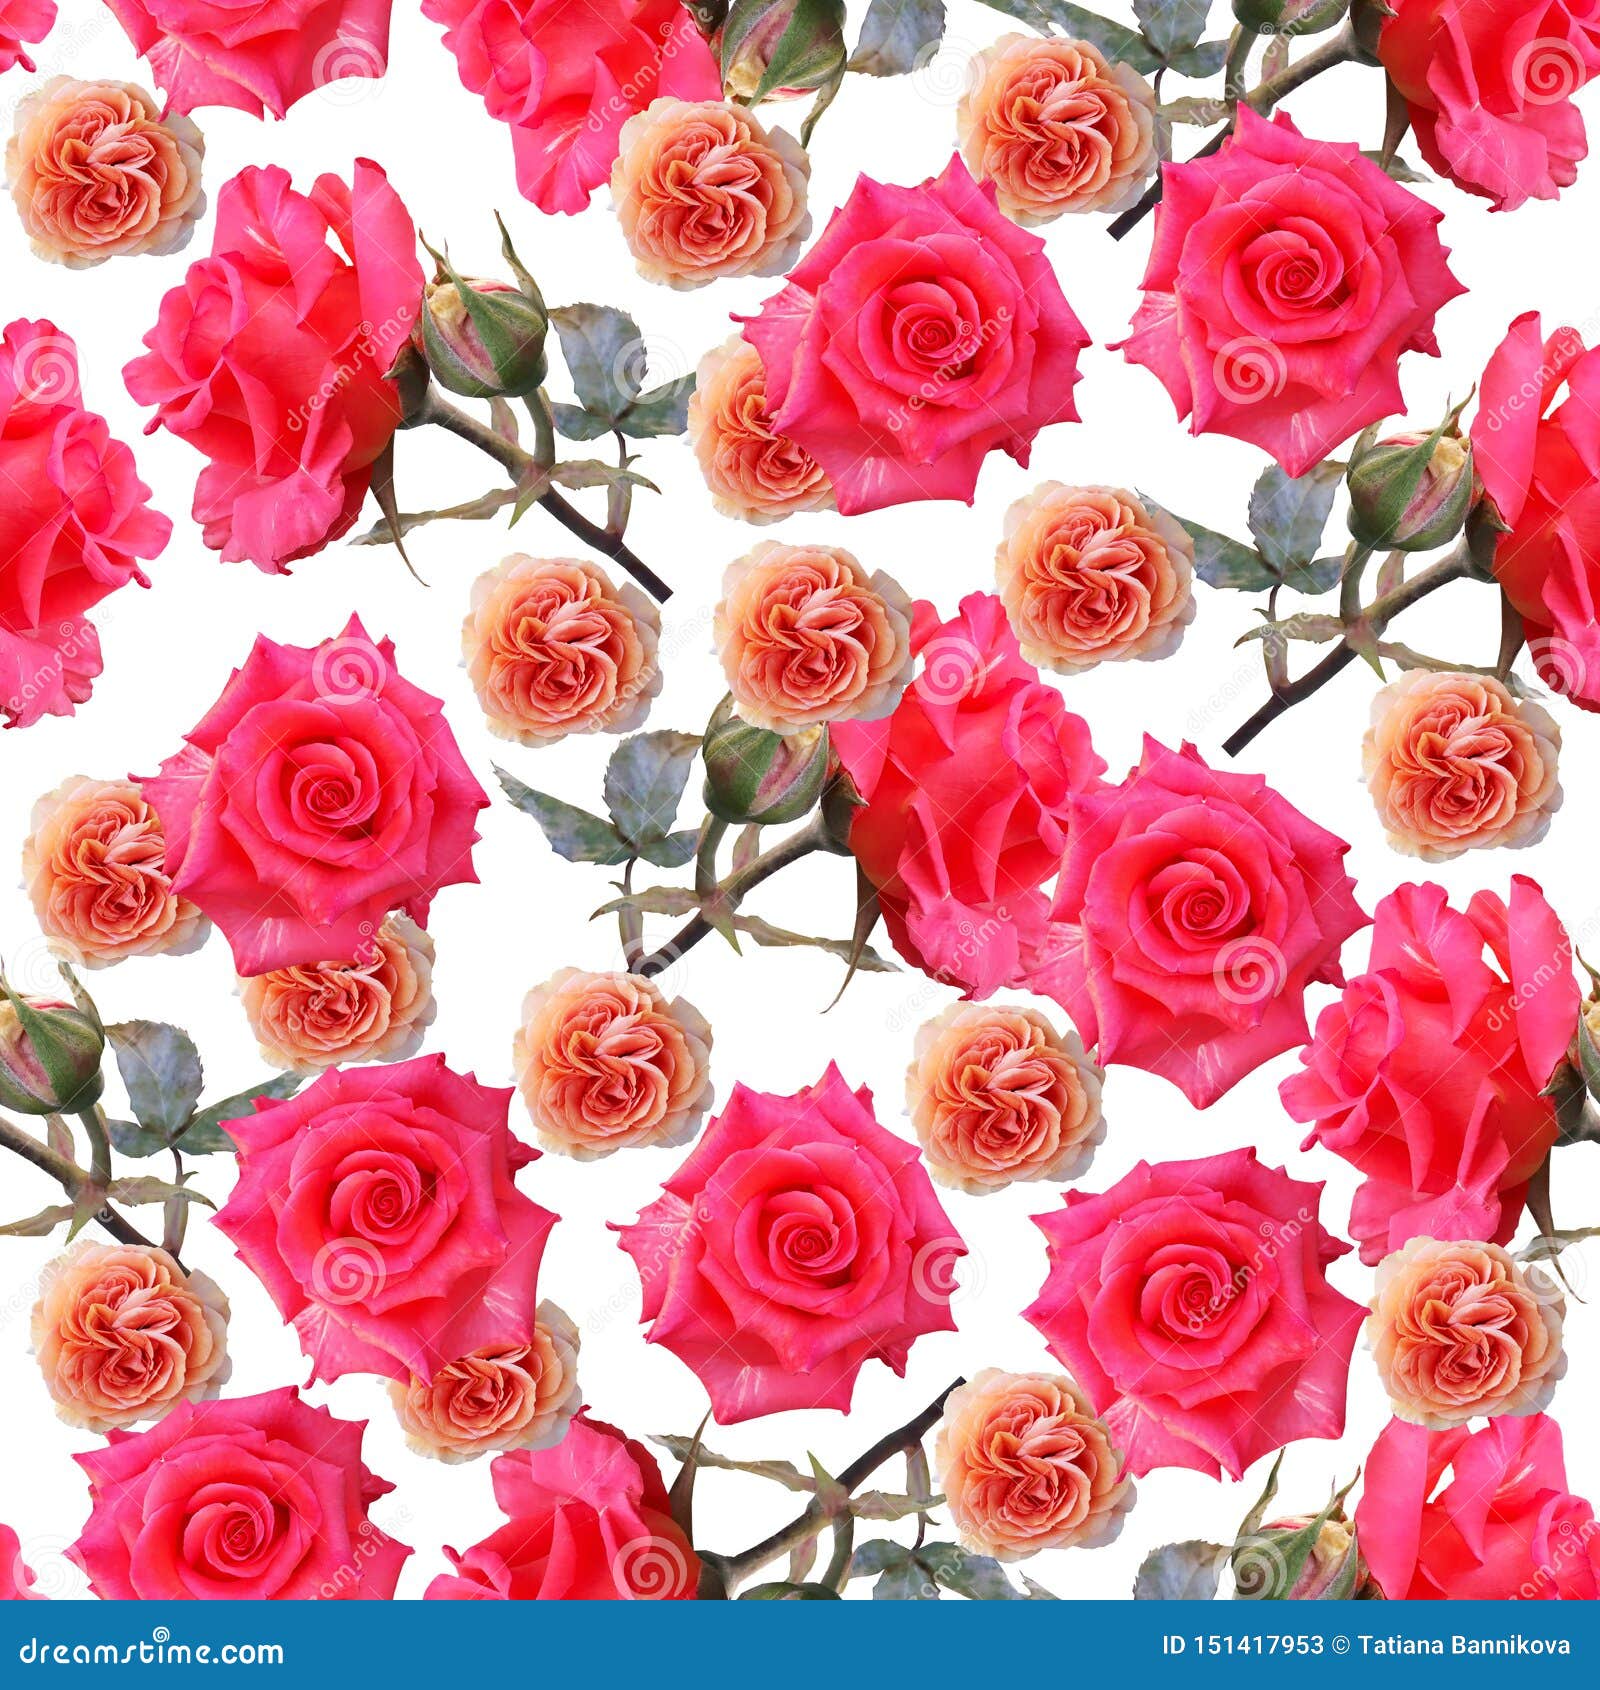 Cute Beautiful Colorful Roses. Seamless Floral Photo Background ...